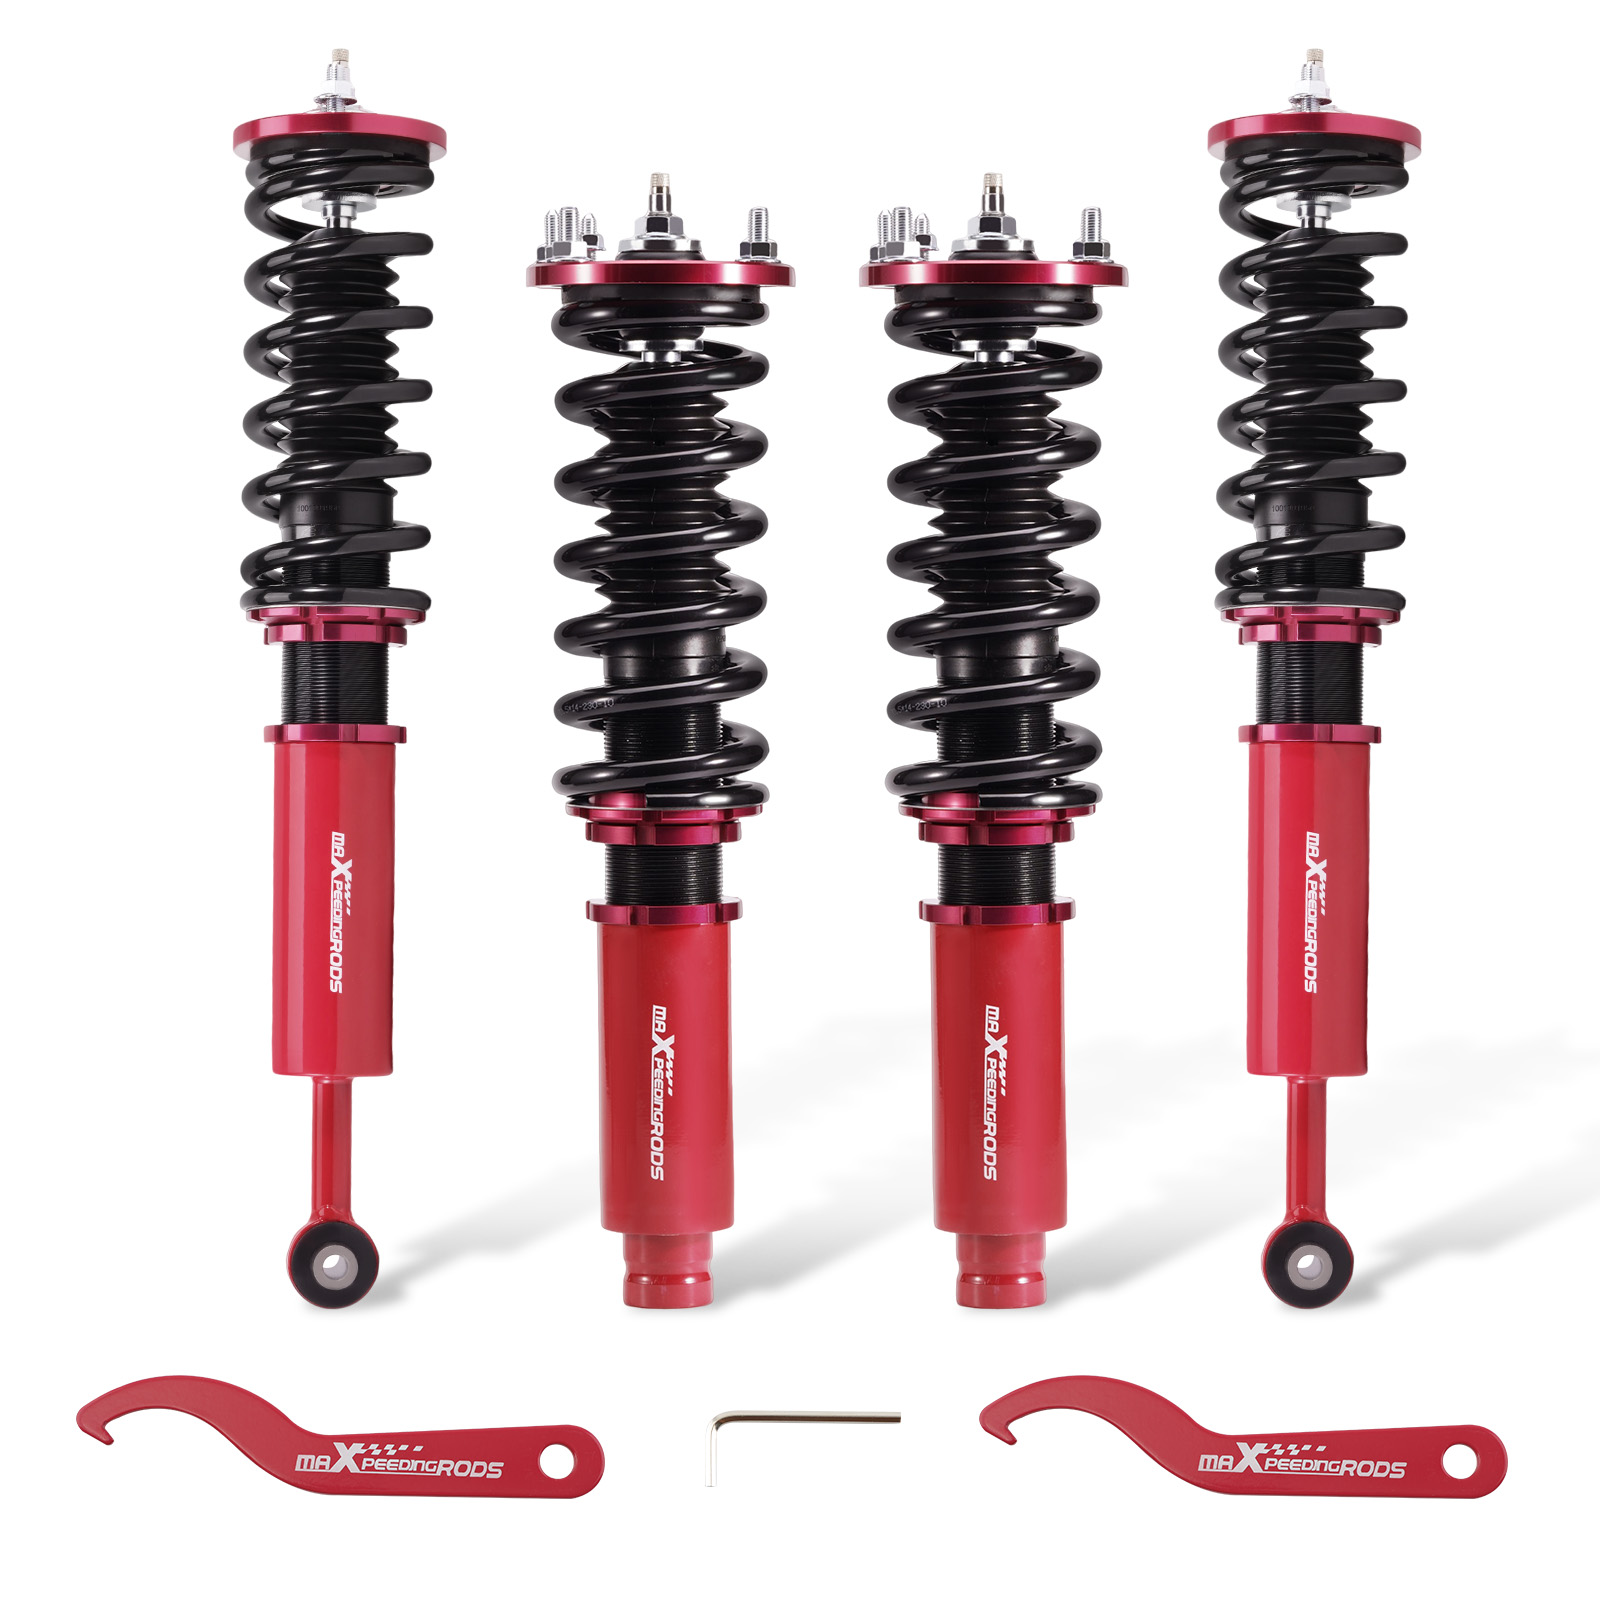 Suspension Coilovers Shocks Springs Fit for Honda Accord 1998-2002 Acura TL CL